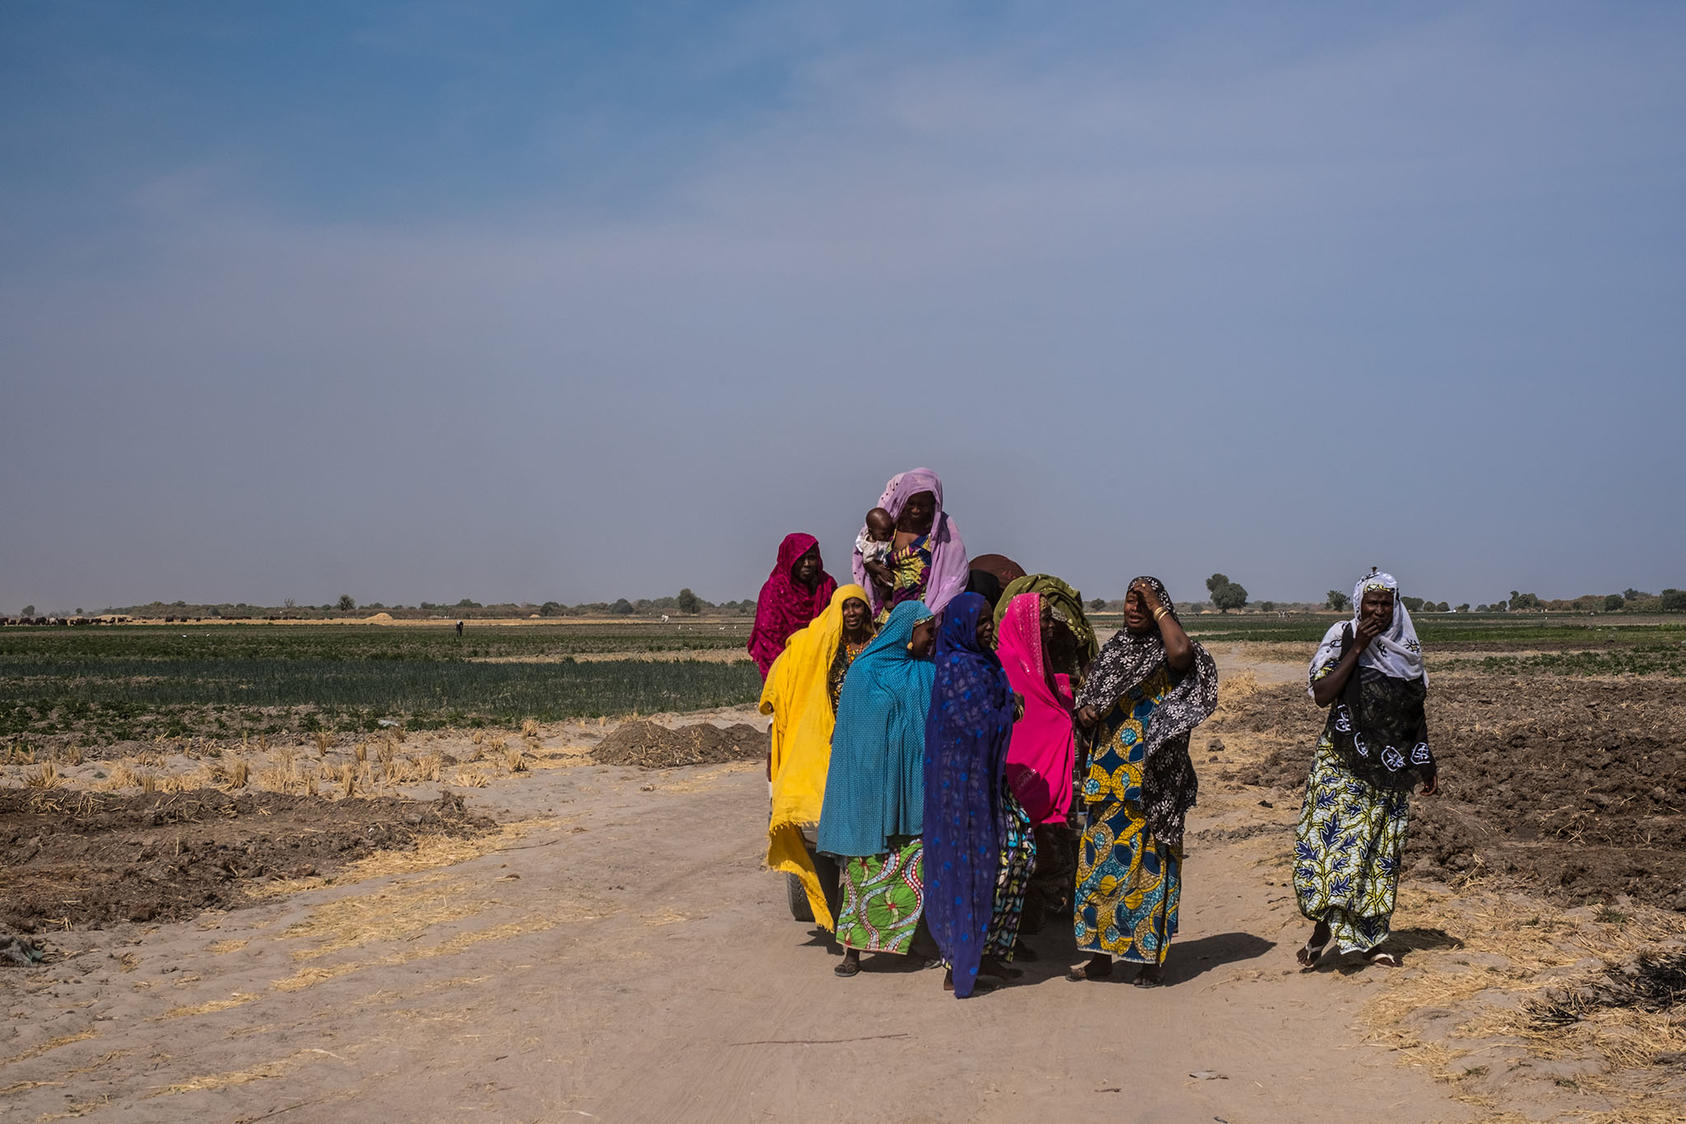 People displaced by Boko Haram, farm as part of a U.N. food program. The military and the government have proclaimed that the countryside outside Maiduguri mostly safe. Photo Courtesy of The New York Times/Ashley Gilbertson